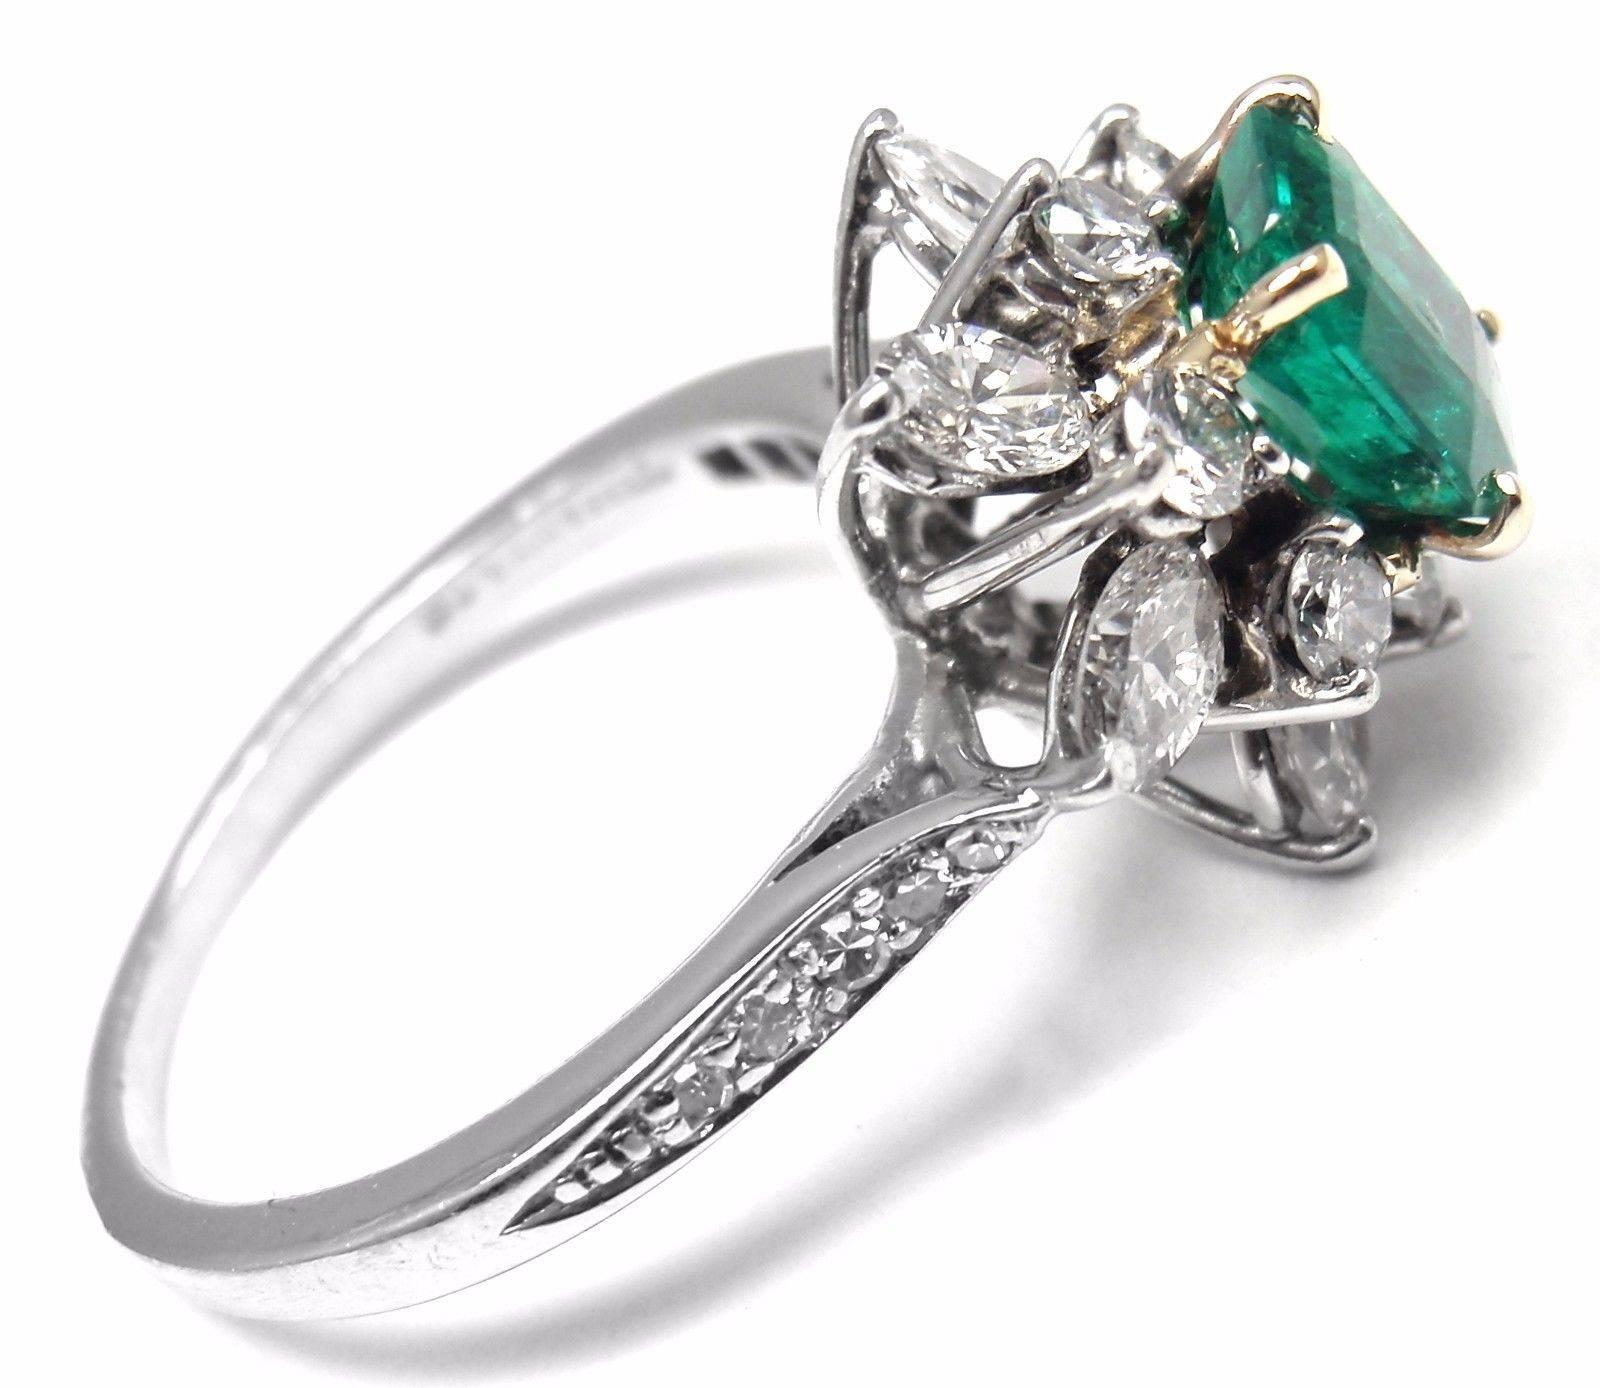 Irid Platinum Emerald Diamond Ring by Tiffany & Co. 
With 16 round shape diamonds and 6 marquis cut diamonds VS1 clarity G color total weight approx. 1ct
1 emerald total weight approx. 1.5ct
This ring comes with Tiffany & Co box.

Details: